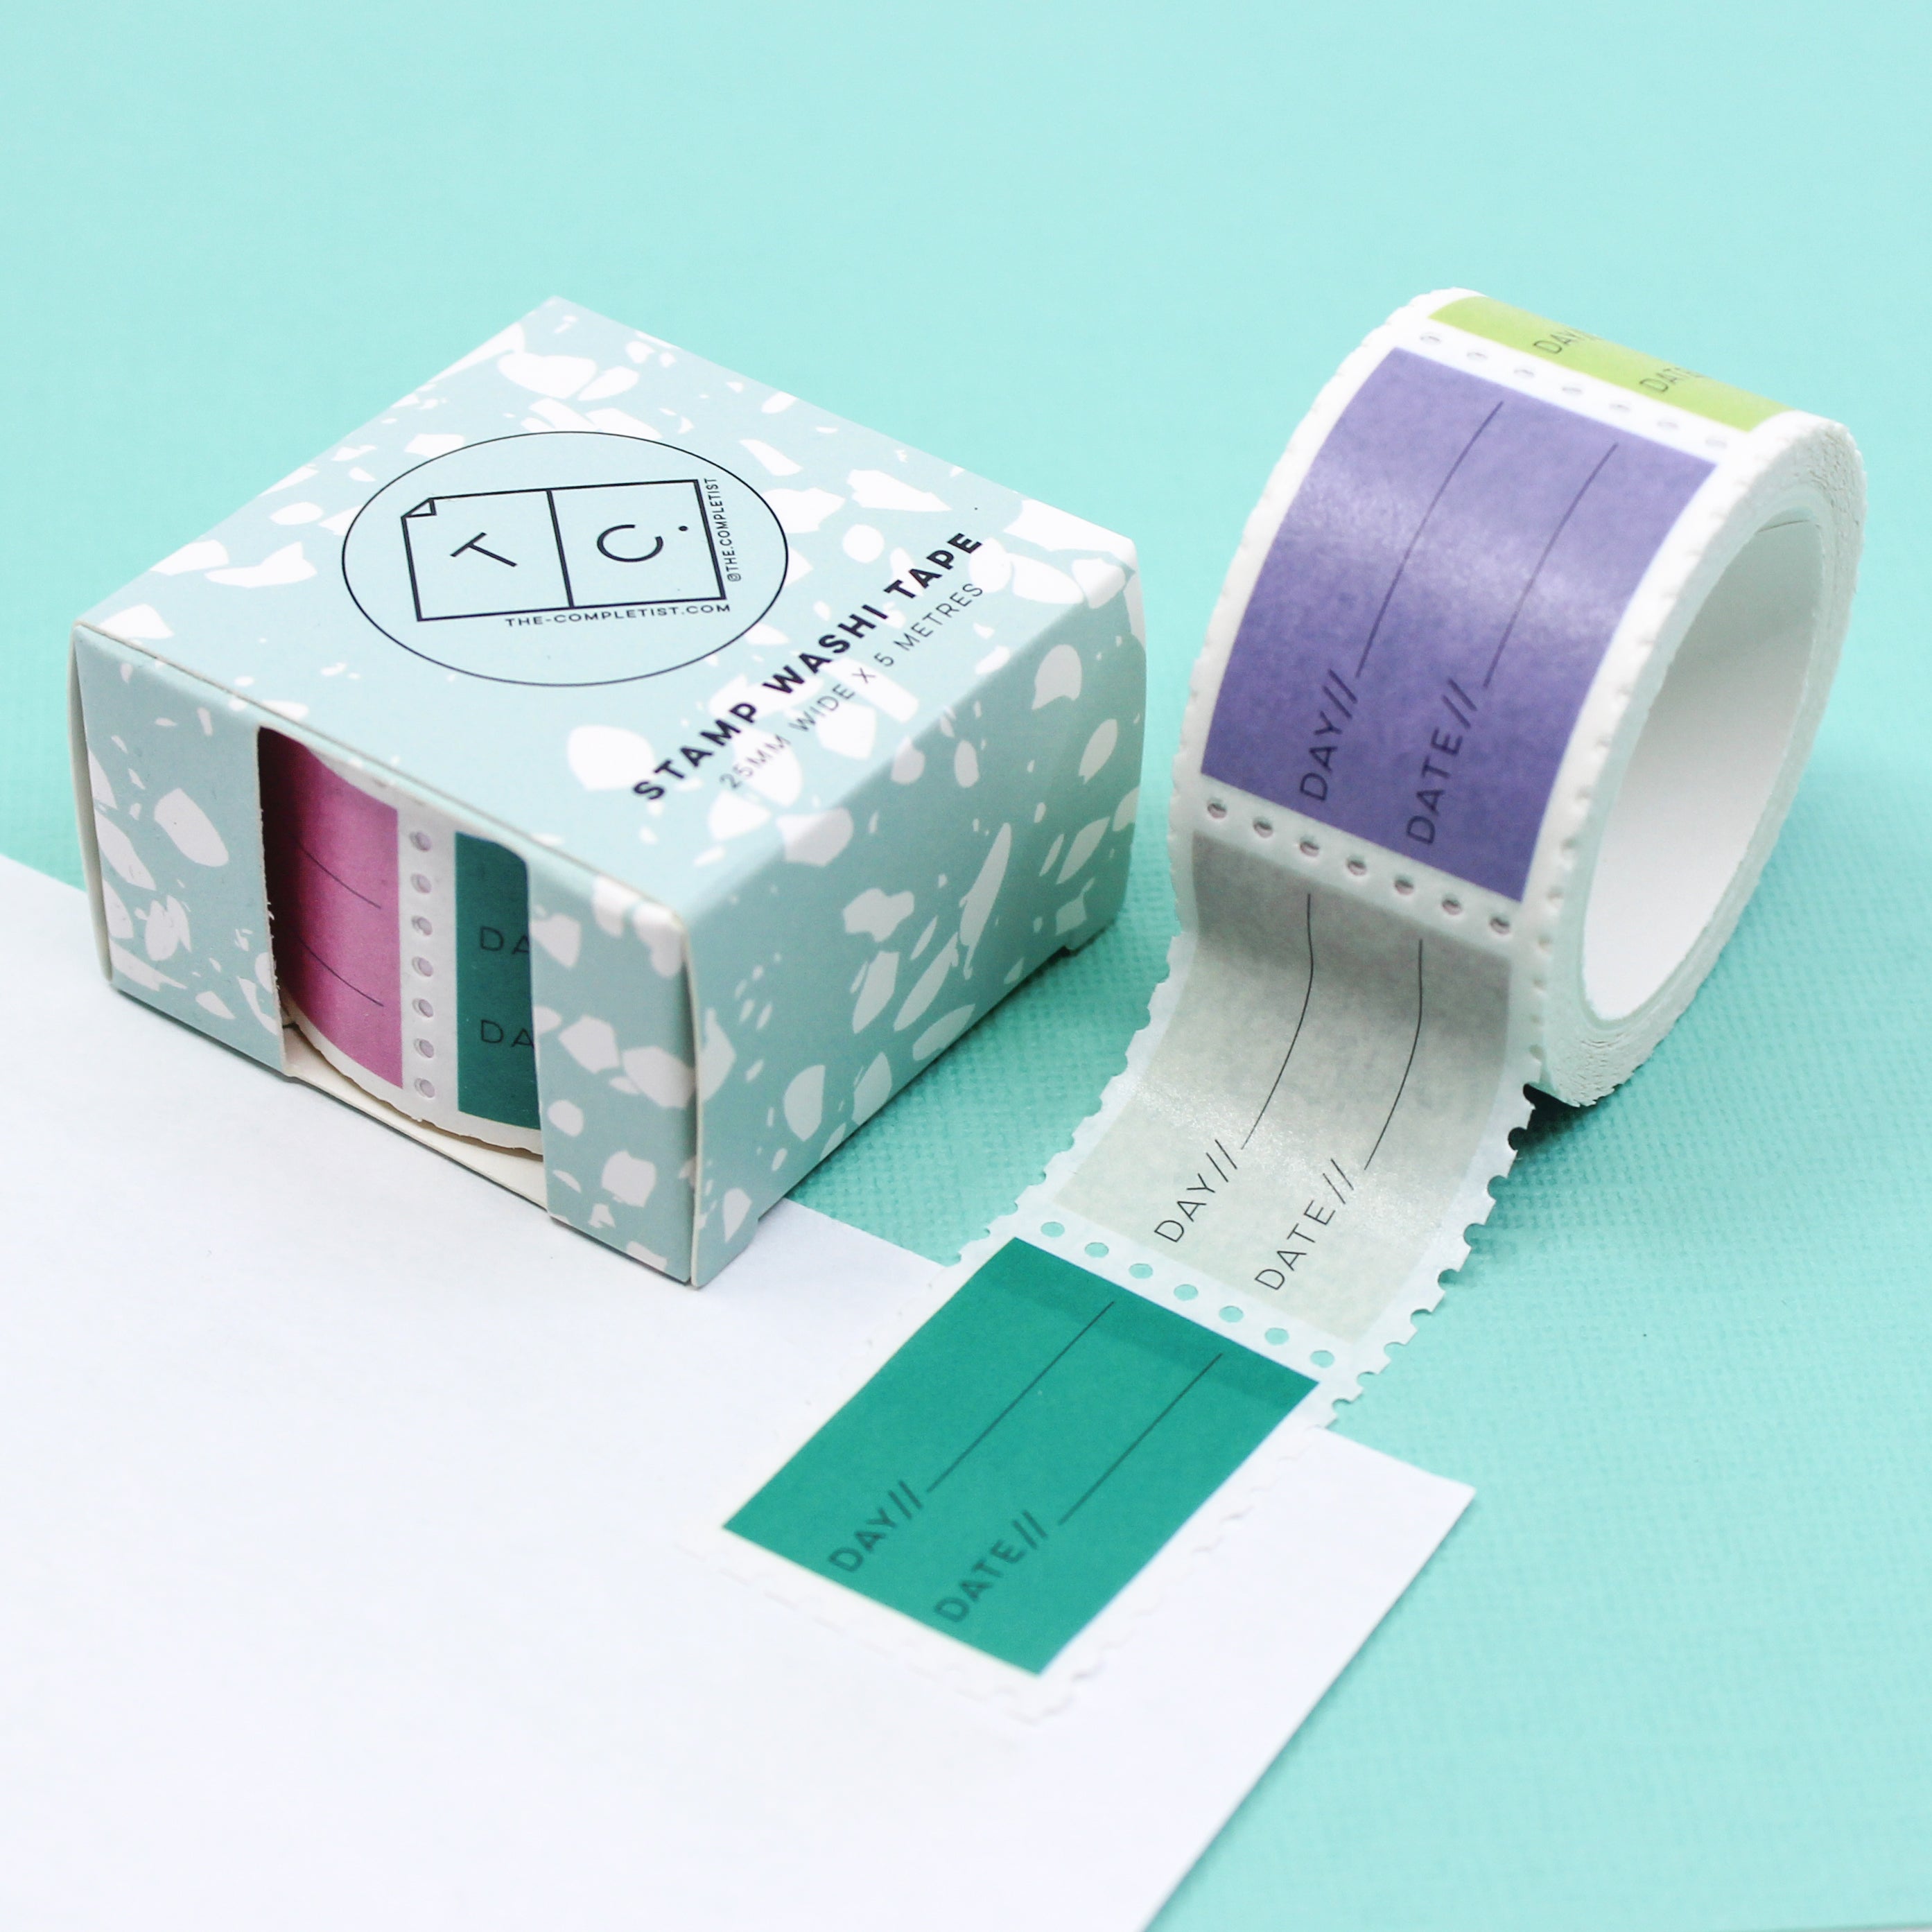 My all time favorite washi tapes (and how I organize them)